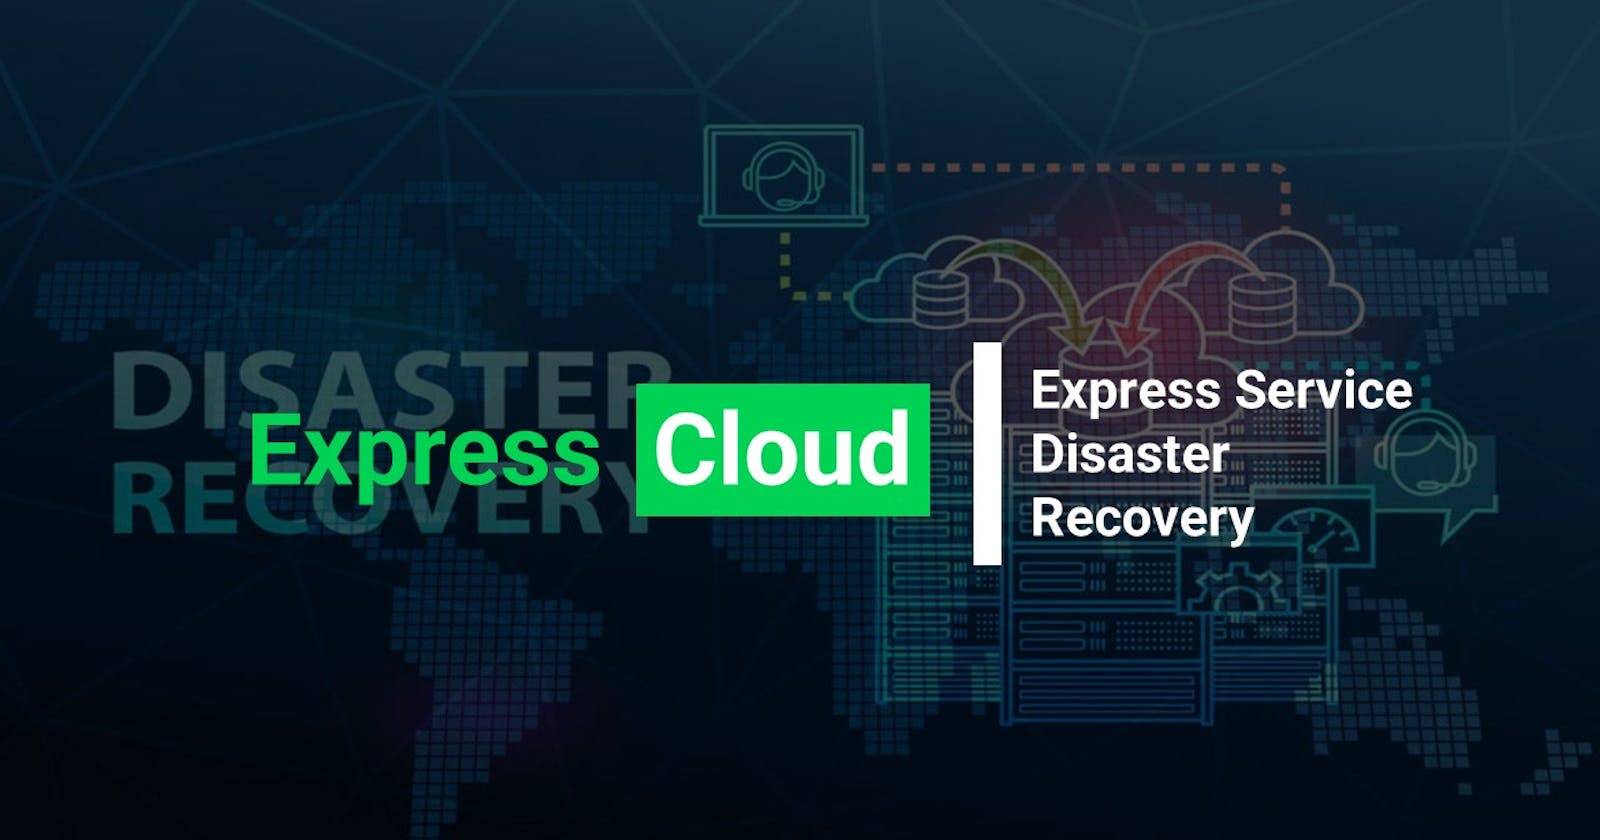 Express Service Disaster Recovery